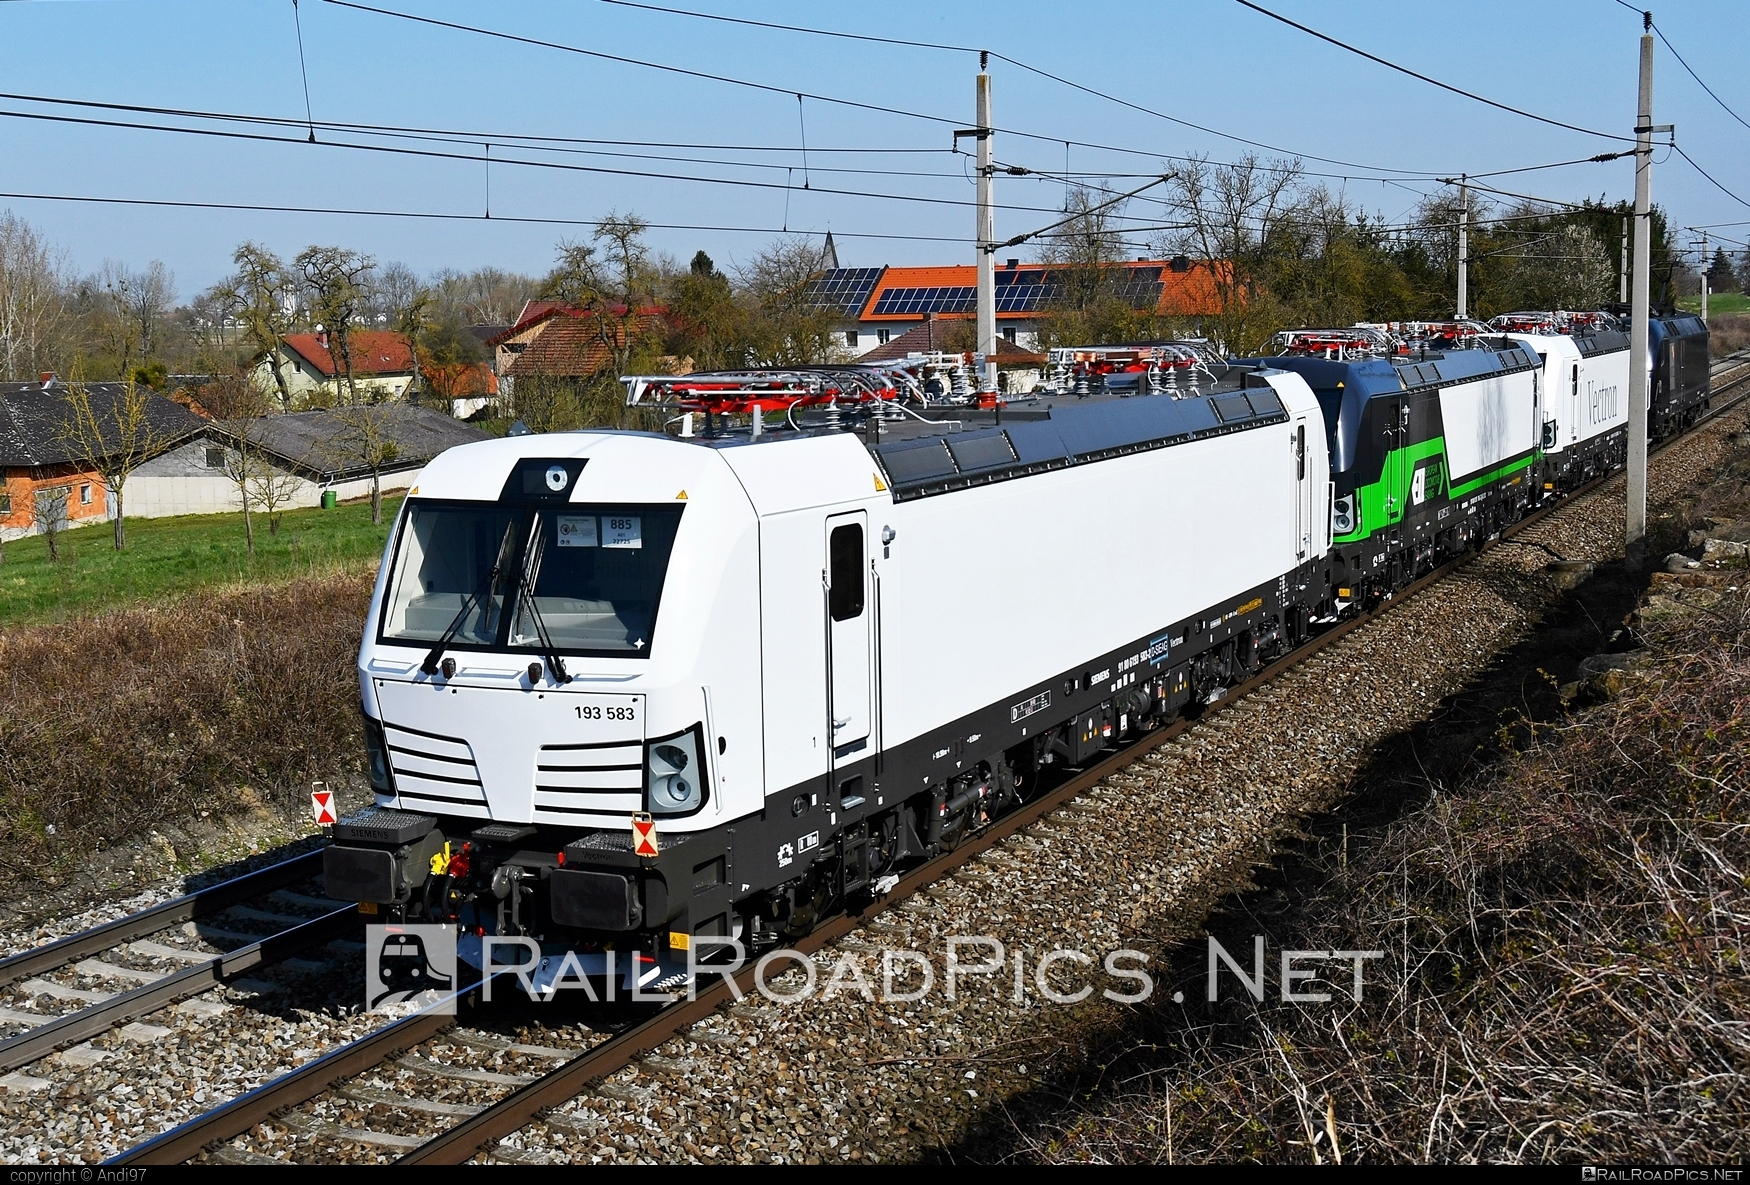 Siemens Vectron MS - 193 583 operated by Captrain Deutschland GmbH #SiemensMobility #SiemensMobilityGmbH #captrain #captrainDeutschland #captrainDeutschlandGmbH #ctd #siemens #siemensVectron #siemensVectronMS #vectron #vectronMS